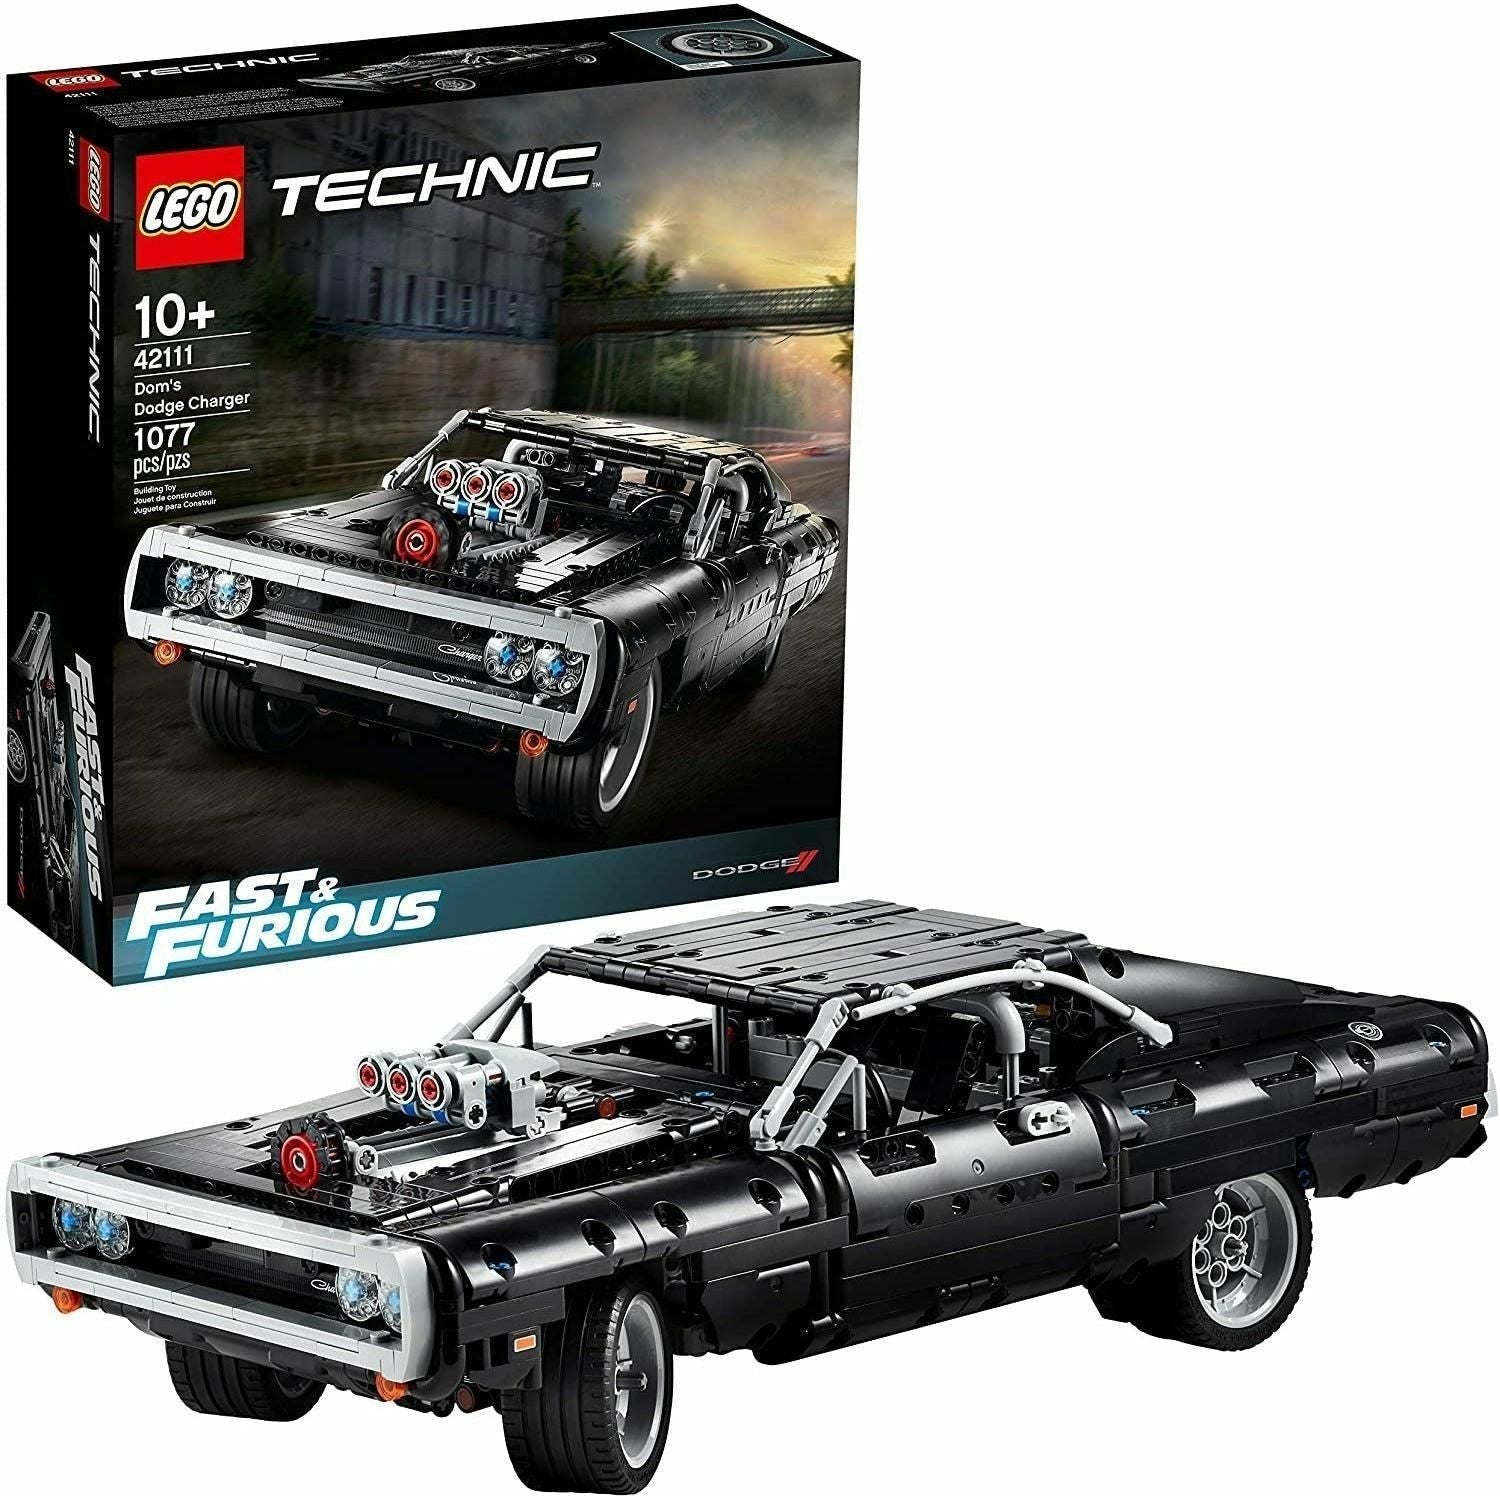 LEGO Technic Fast & Furious Dom's Dodge Charger 42111 Race Car Building Set (1,077 Pieces) - BumbleToys - 14 Years & Up, 8+ Years, 8-13 Years, Boys, Cars, LEGO, OXE, Pre-Order, Technic